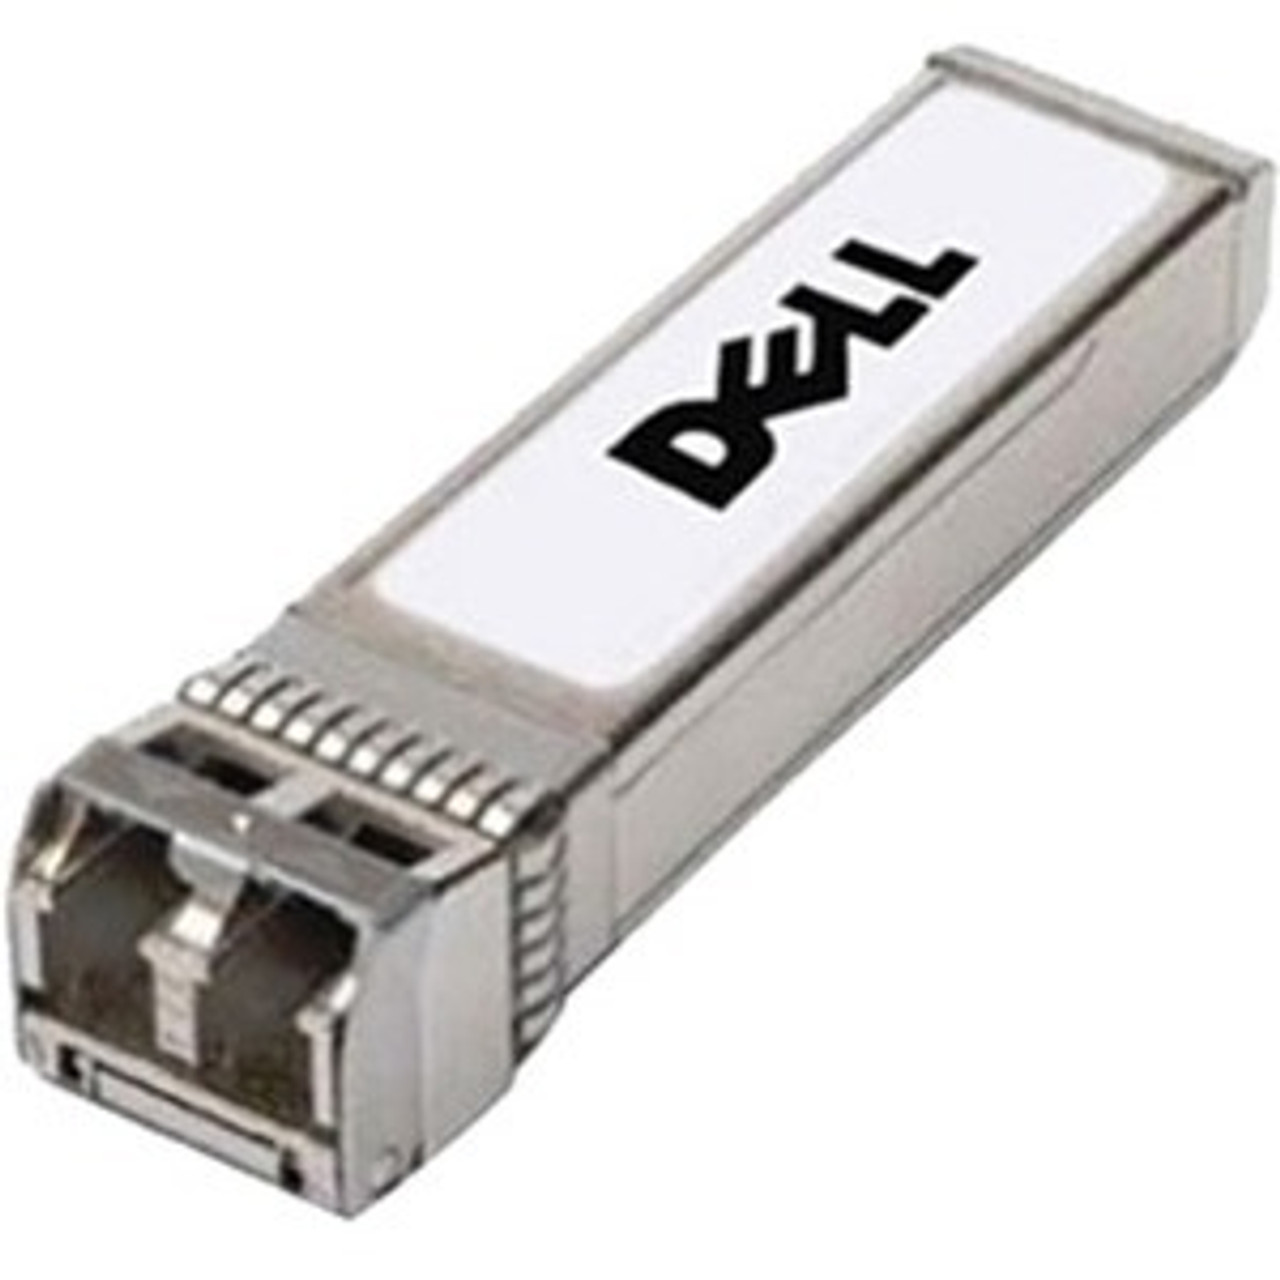 407-BBOY-ACC Accortec 1Gbps 1000Base-ZX Single-mode Fiber 80km 1550nm Duplex LC Connector SFP Transceiver Module for Dell Compatible